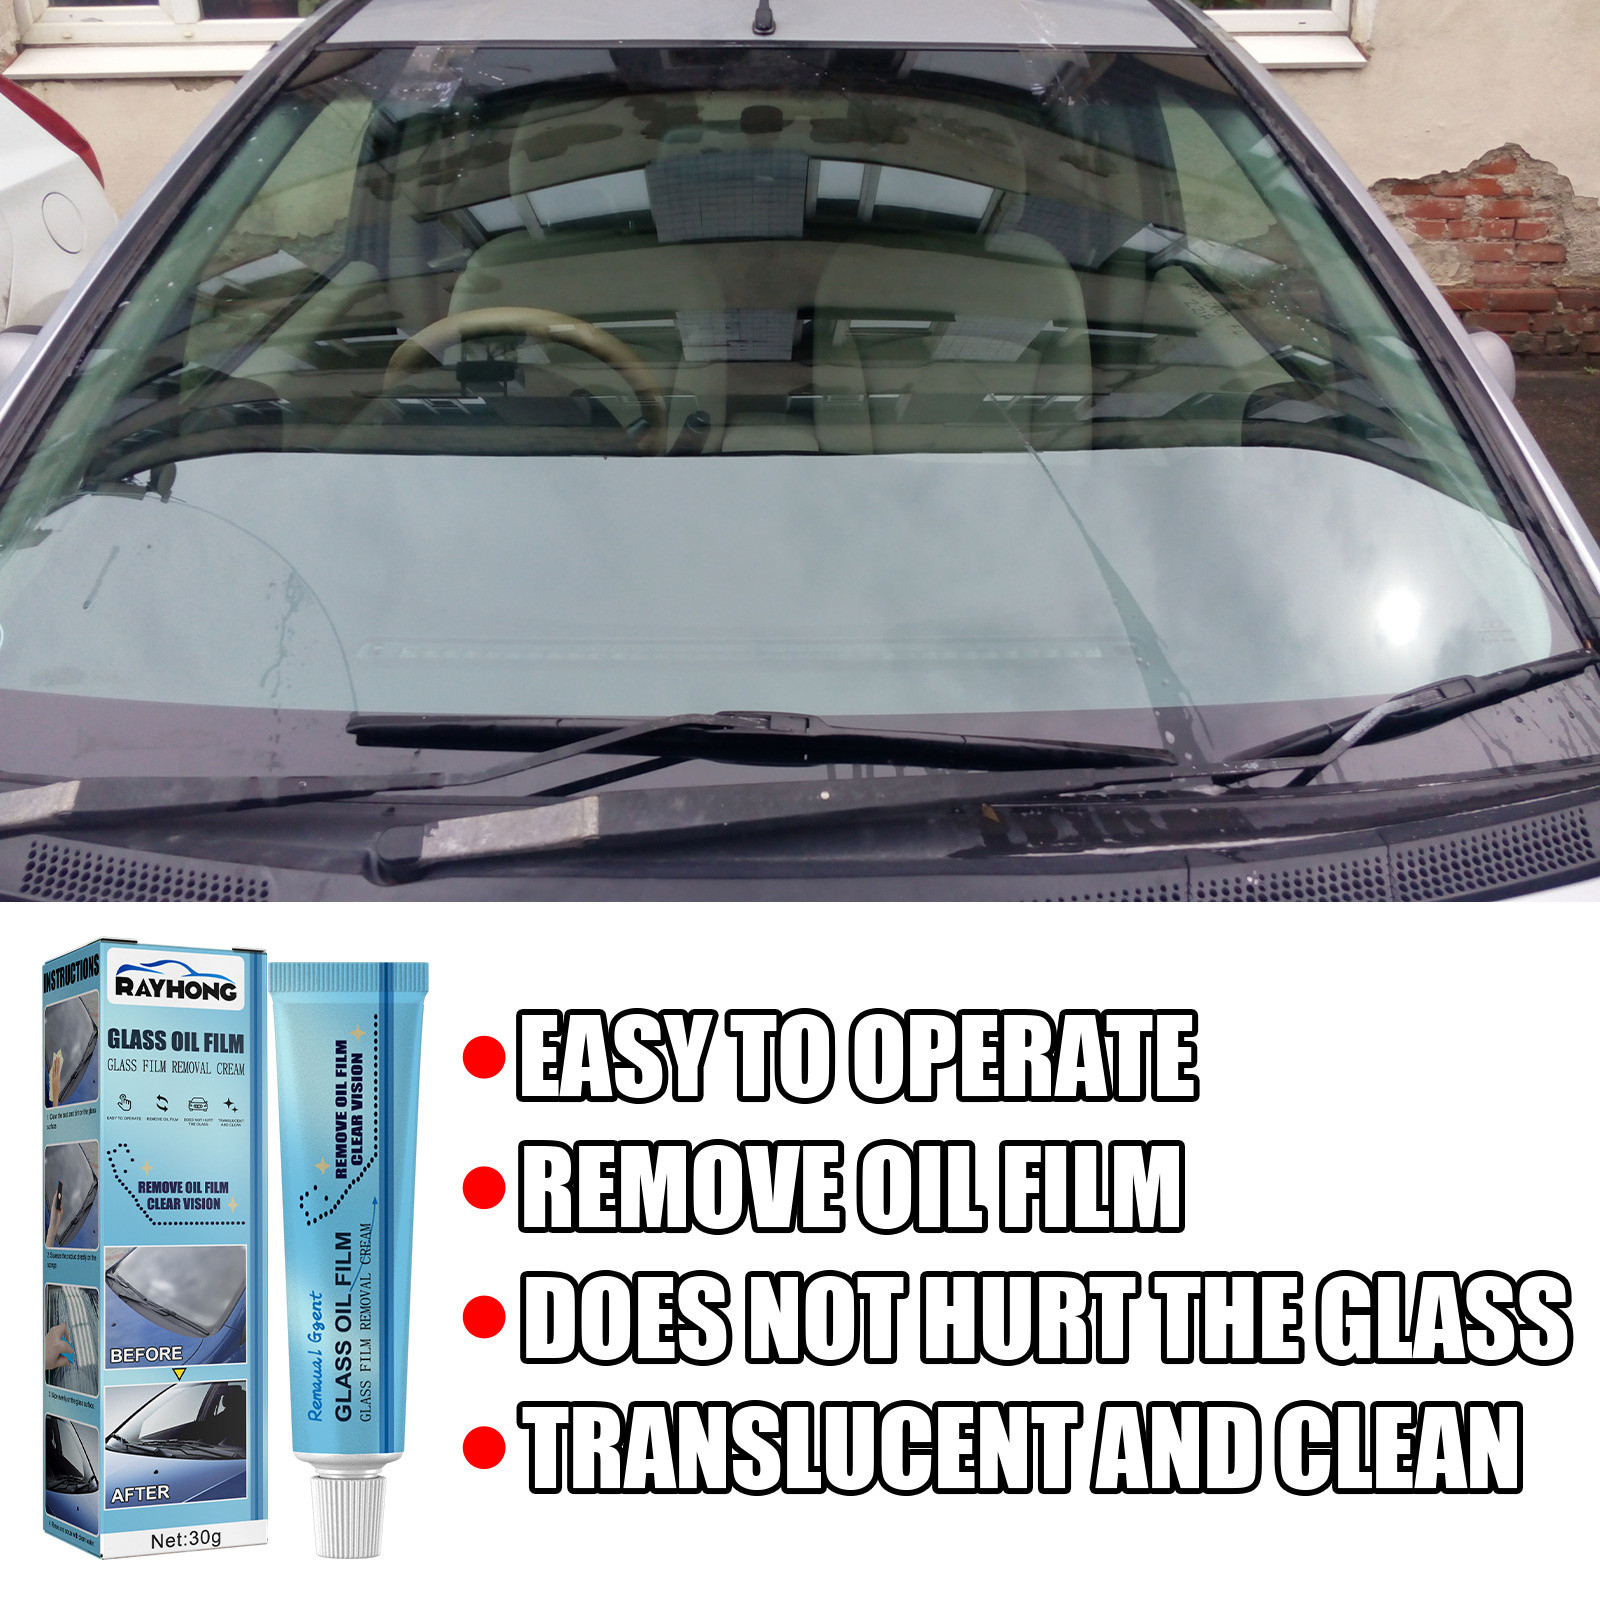 Qisiwole Glass Oil Film Cleaner,Glass Oil Film Removing Paste,Glass Stripper Water Spot Remover, Car Windshield Oil Film Cleaner,Windshield Cleaner